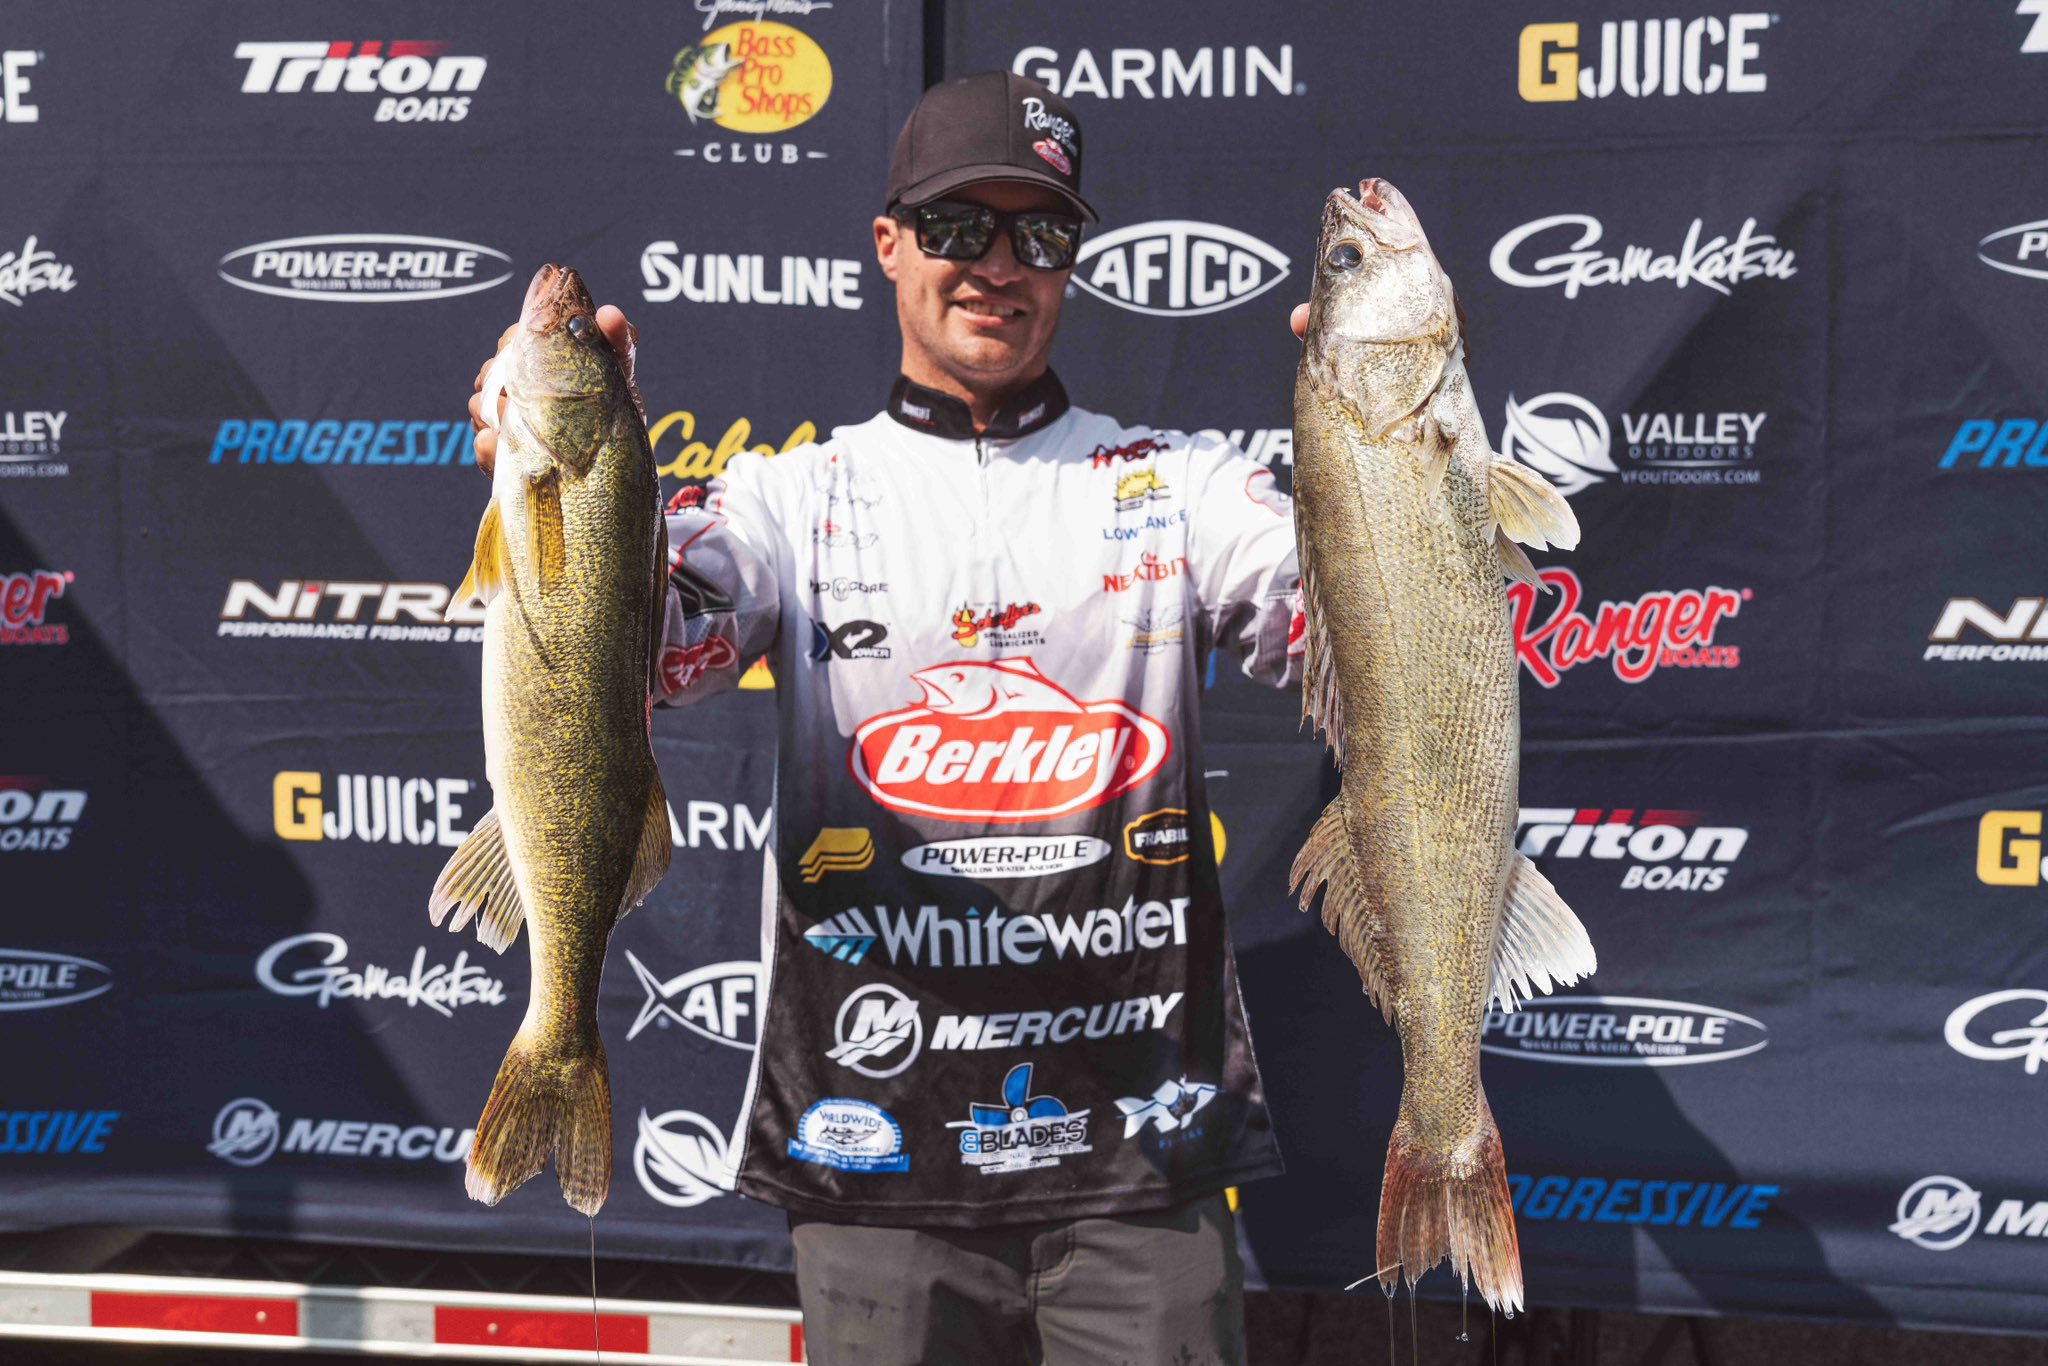 The Next Bite TV on X: It's Walleye Wednesday and Korey Sprengel has a  couple nice ones from a tournament. Let's see those fish even if they are  not walleye. #thenextbitetv #koreysprengel #